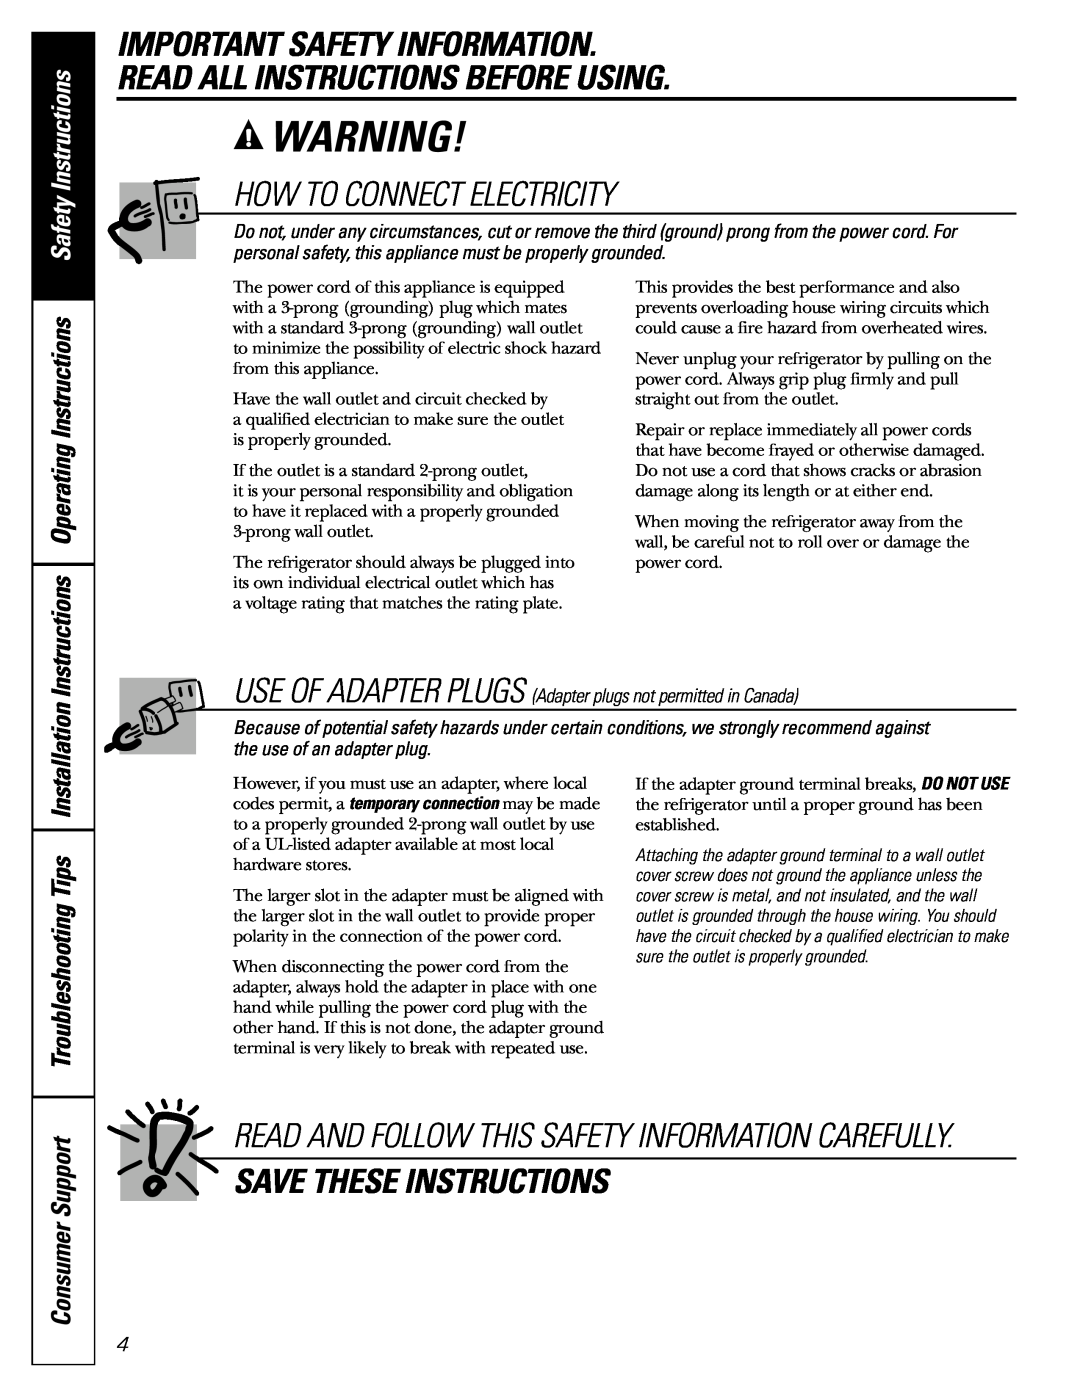 GE 200D2463P002 How To Connect Electricity, Save These Instructions, Troubleshooting Tips, Consumer Support 